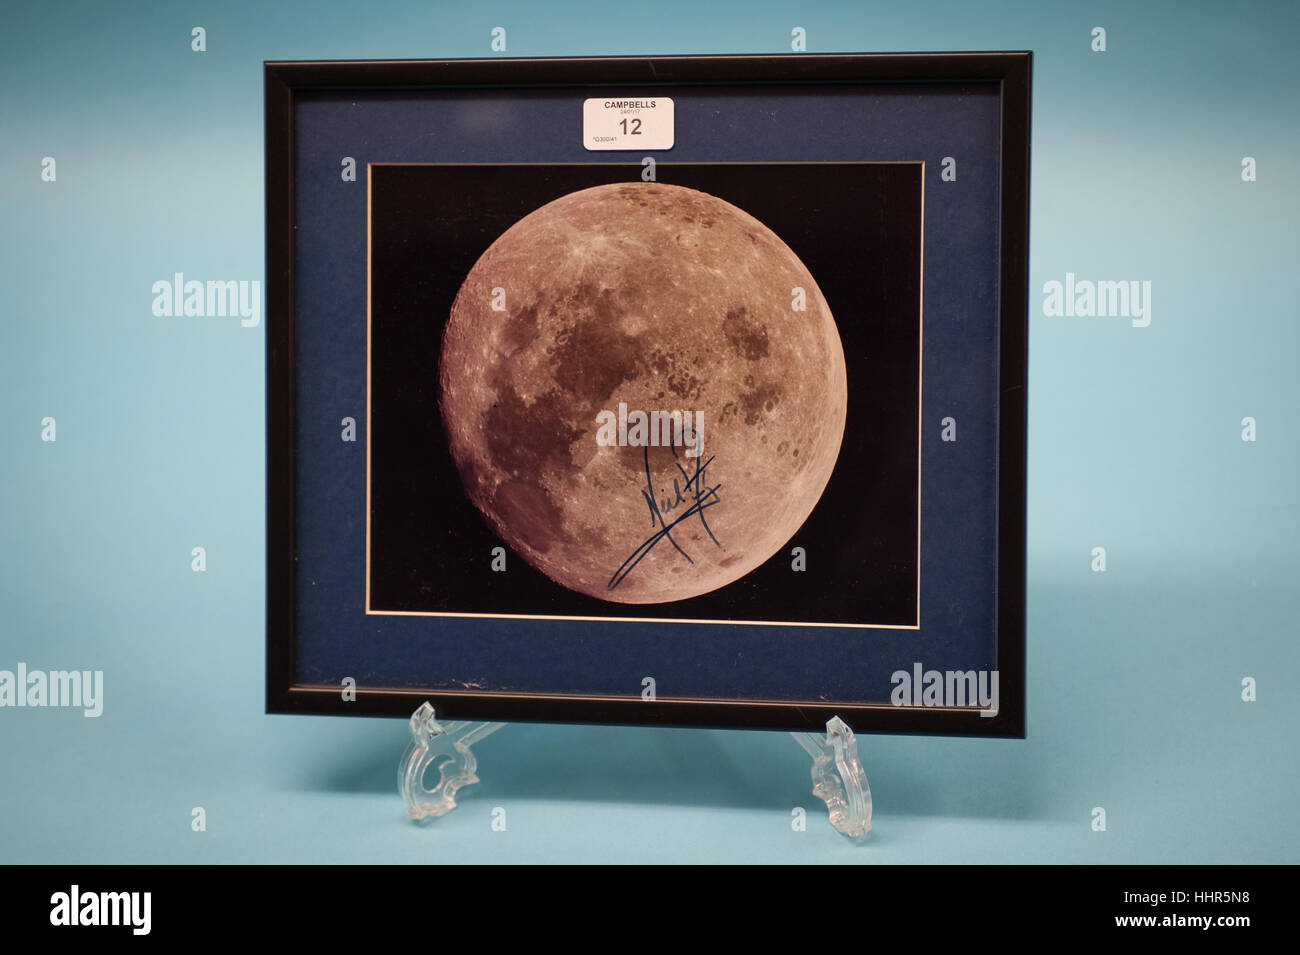 A collection of more than 1,000 signatures from iconic historical figures from the past five centuries will be offered by auctioneers Campbells on Tuesday, January 24th 2017, in Worthing. In Photo: One of the lots that will be offered for sale at the auction, a autograph by Neil Armstrong, first person to walk on the moon, Apollo 11, 1969, on a photograph of the moon. Credit: Scott Ramsey/Alamy Live News Stock Photo